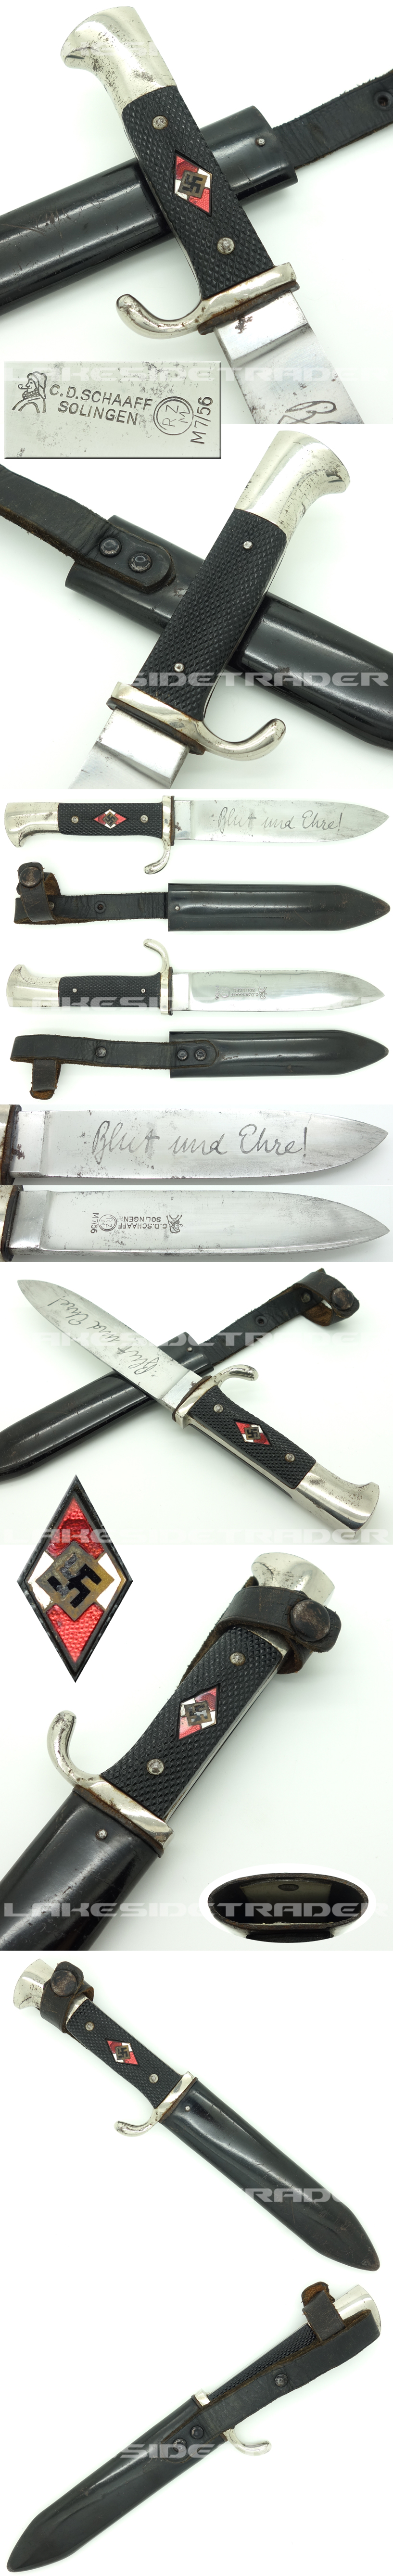 Transitional Hitler Youth Knife by C.D. Schaaff